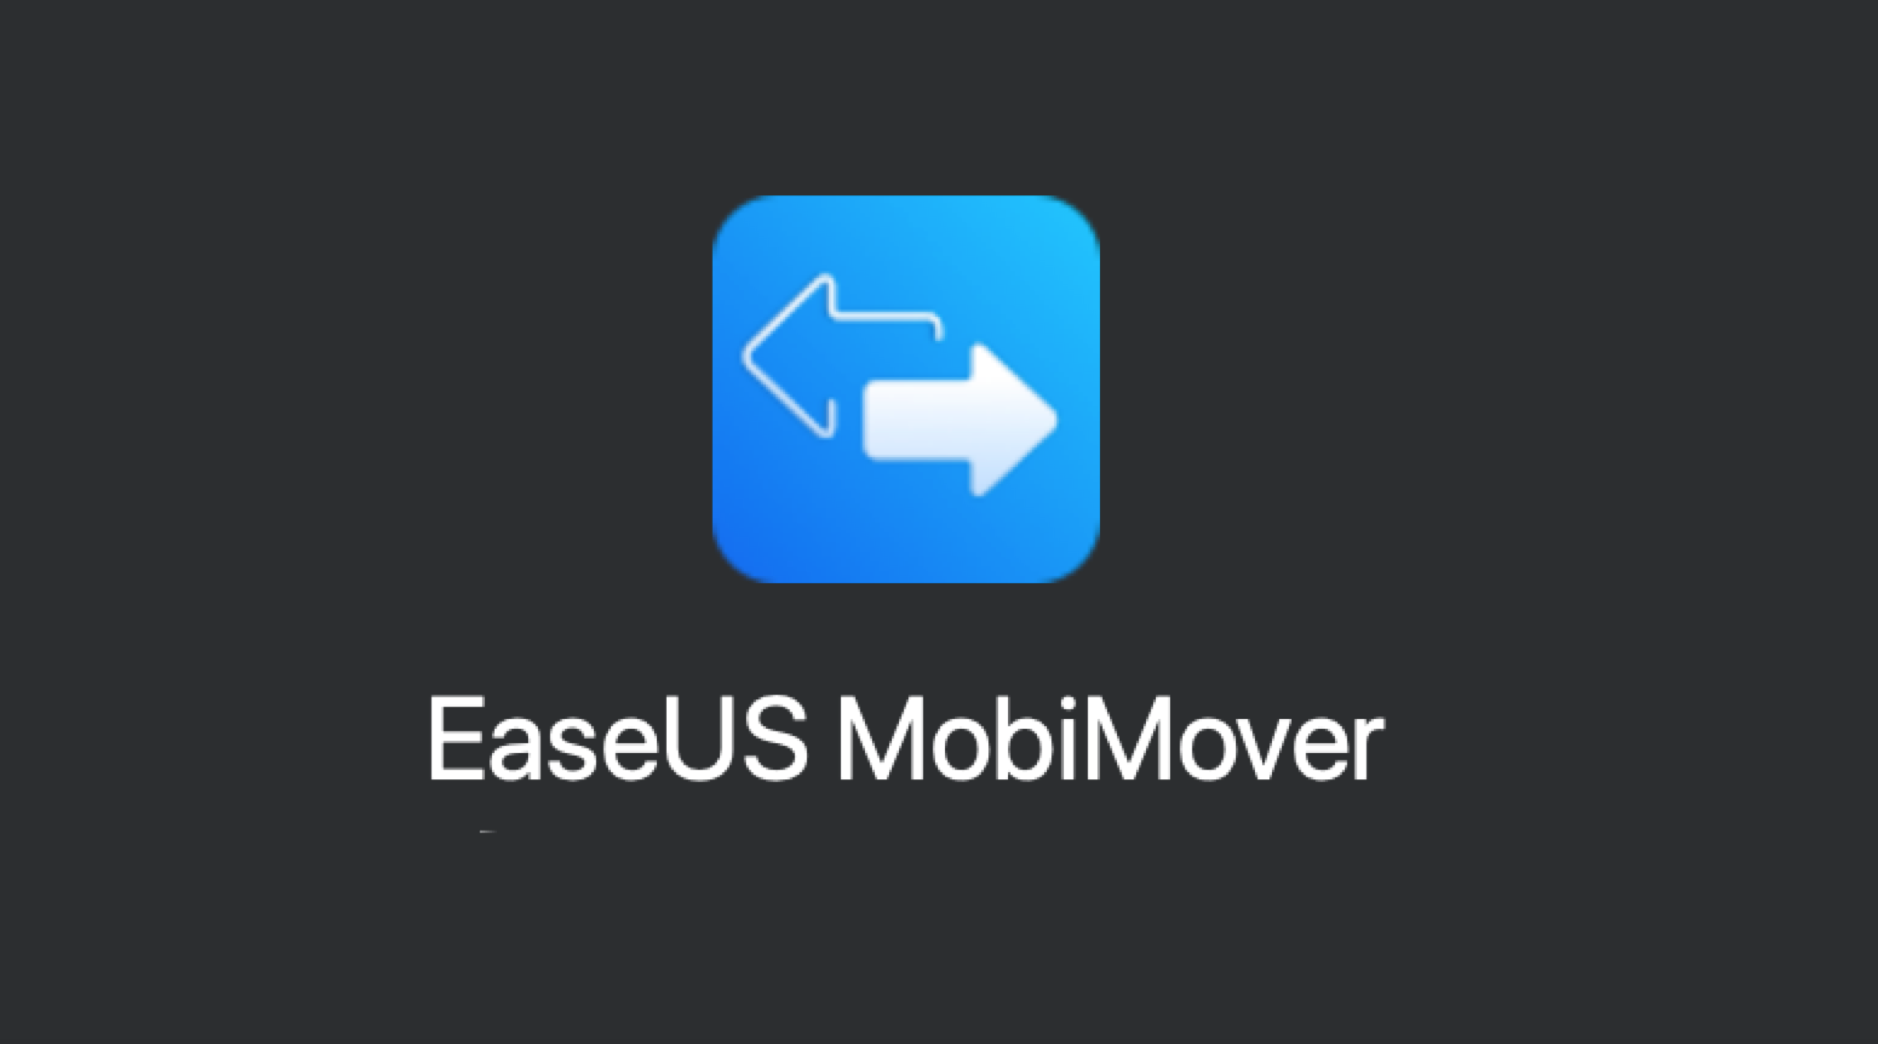 easeus mobimover transfer picture to ipad